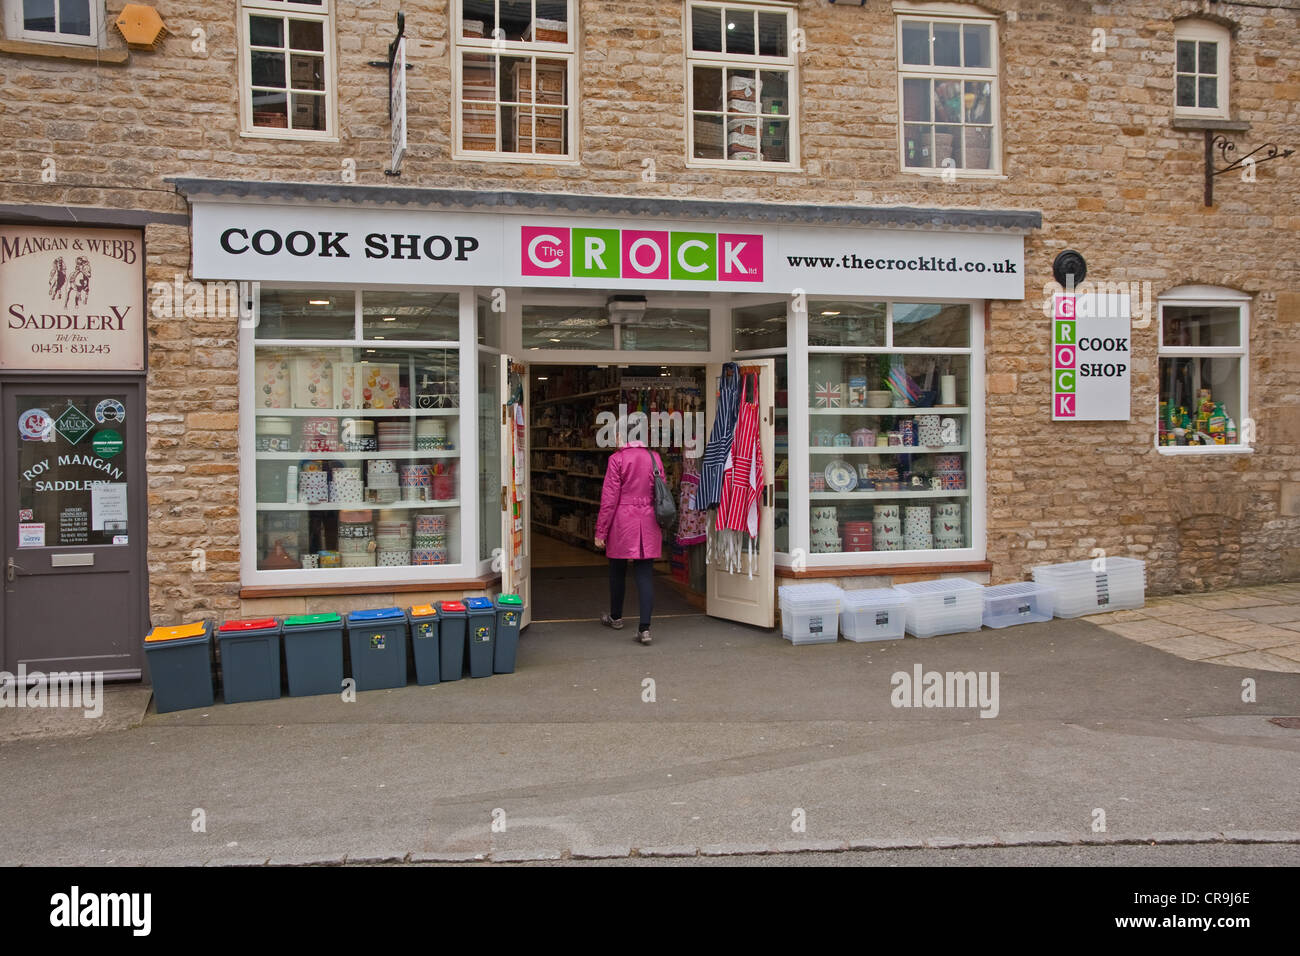 Crock shop, kitchenware shop, Stowe-on-the-Wold Stock Photo